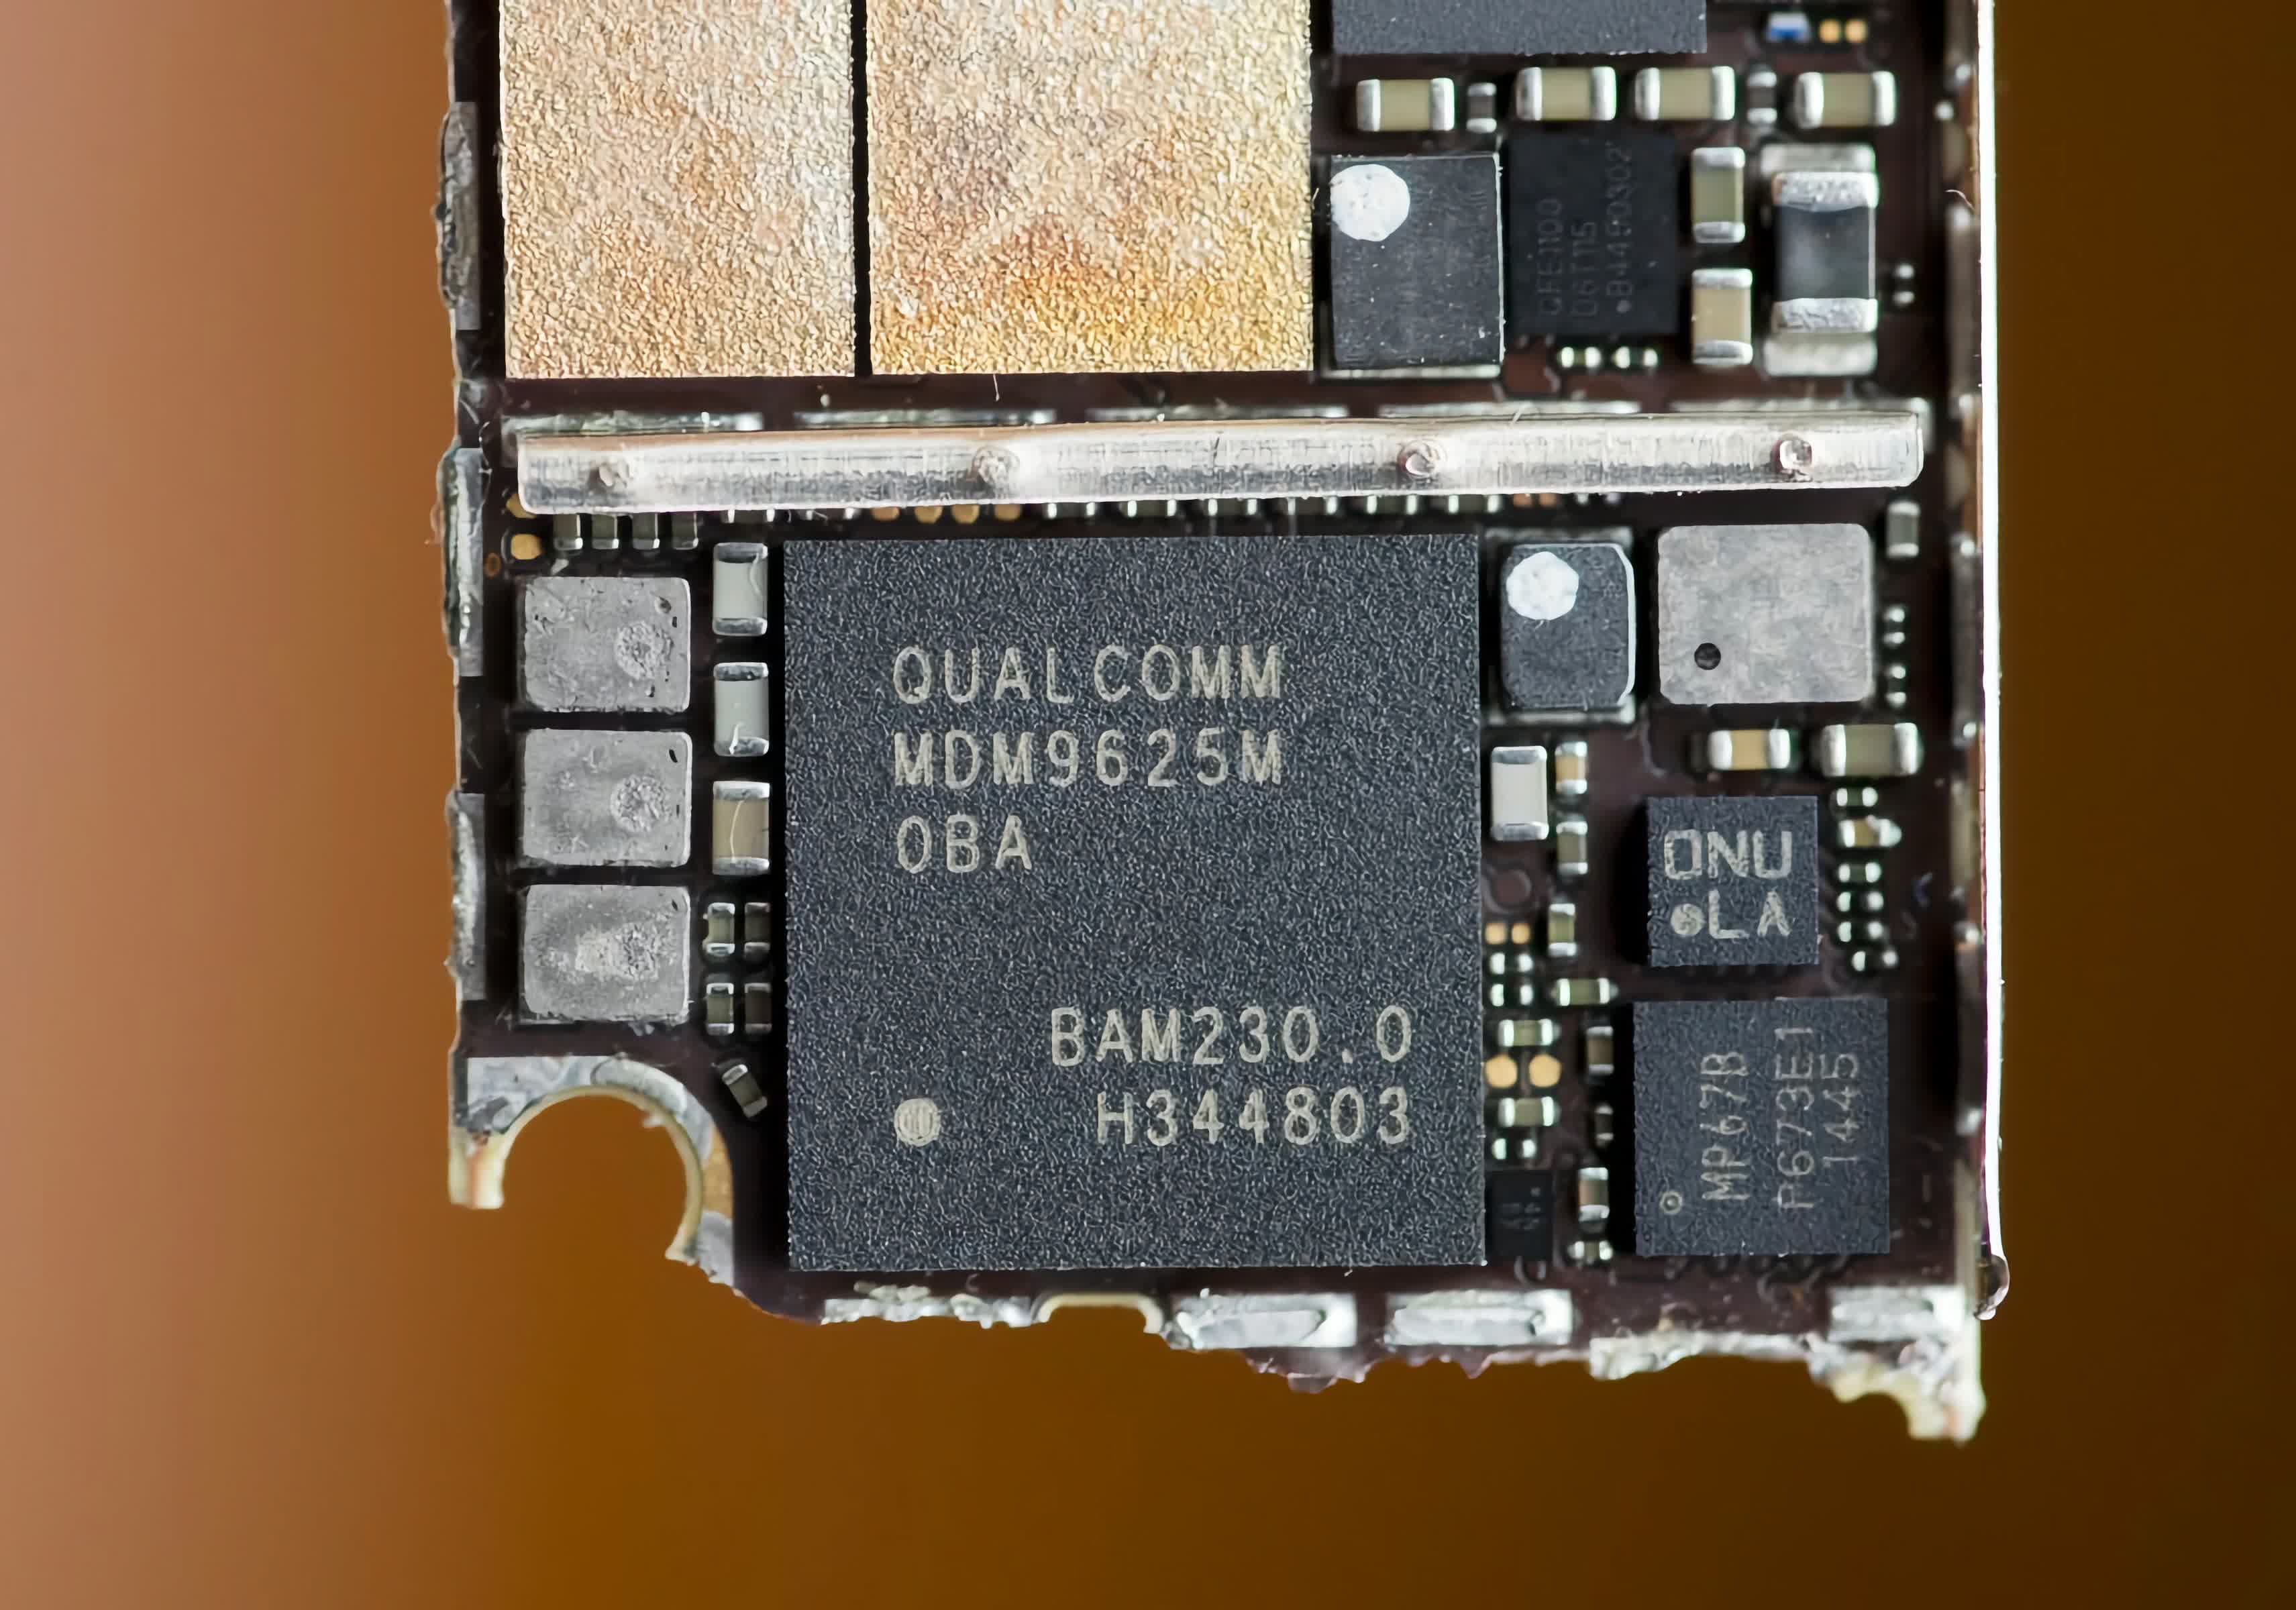 With no easy path to replace Apple revenue, can Qualcomm ever grow again?